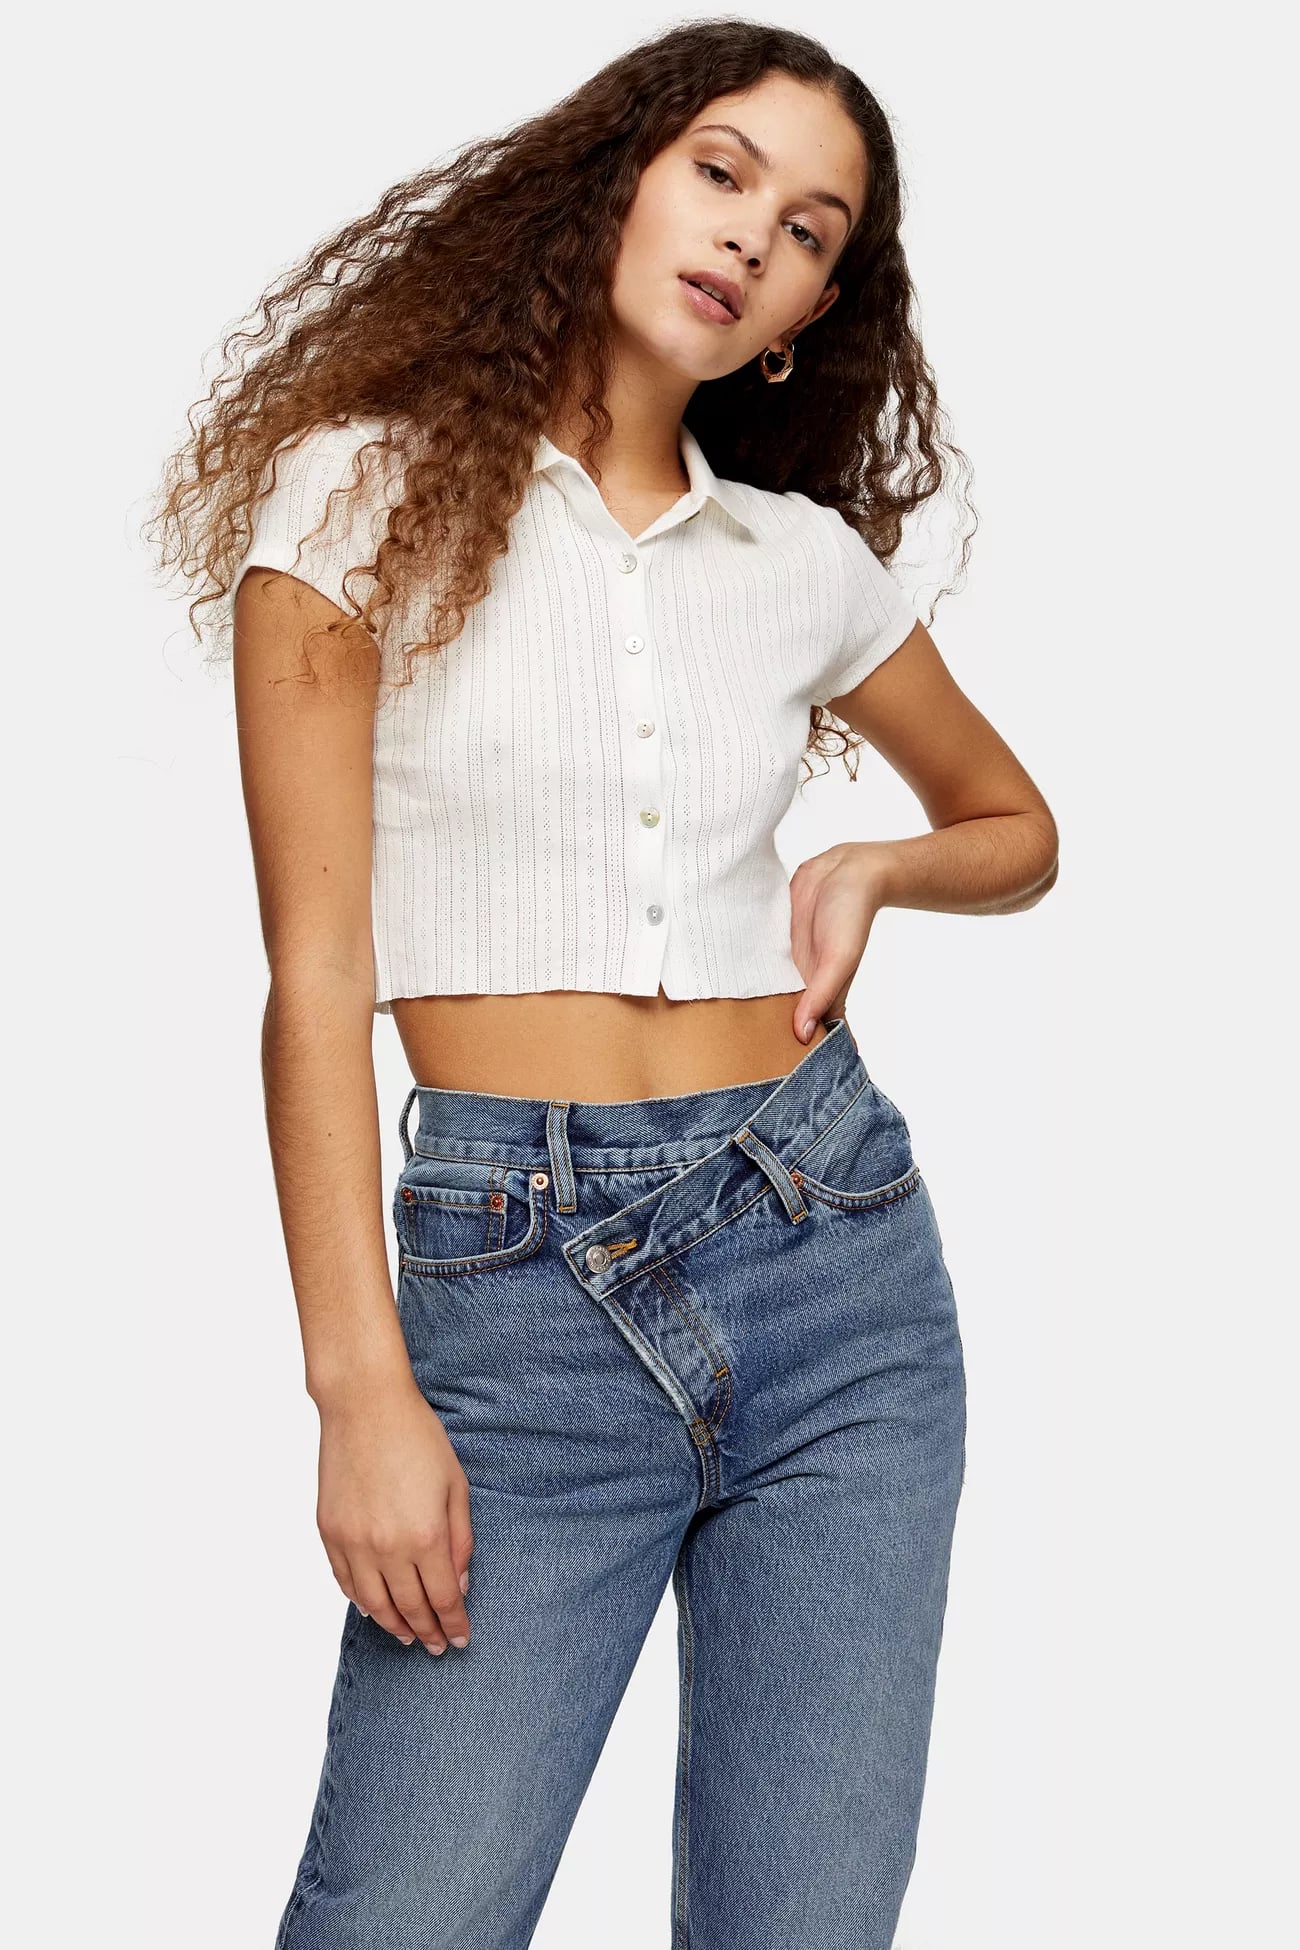 polo crop top outfit